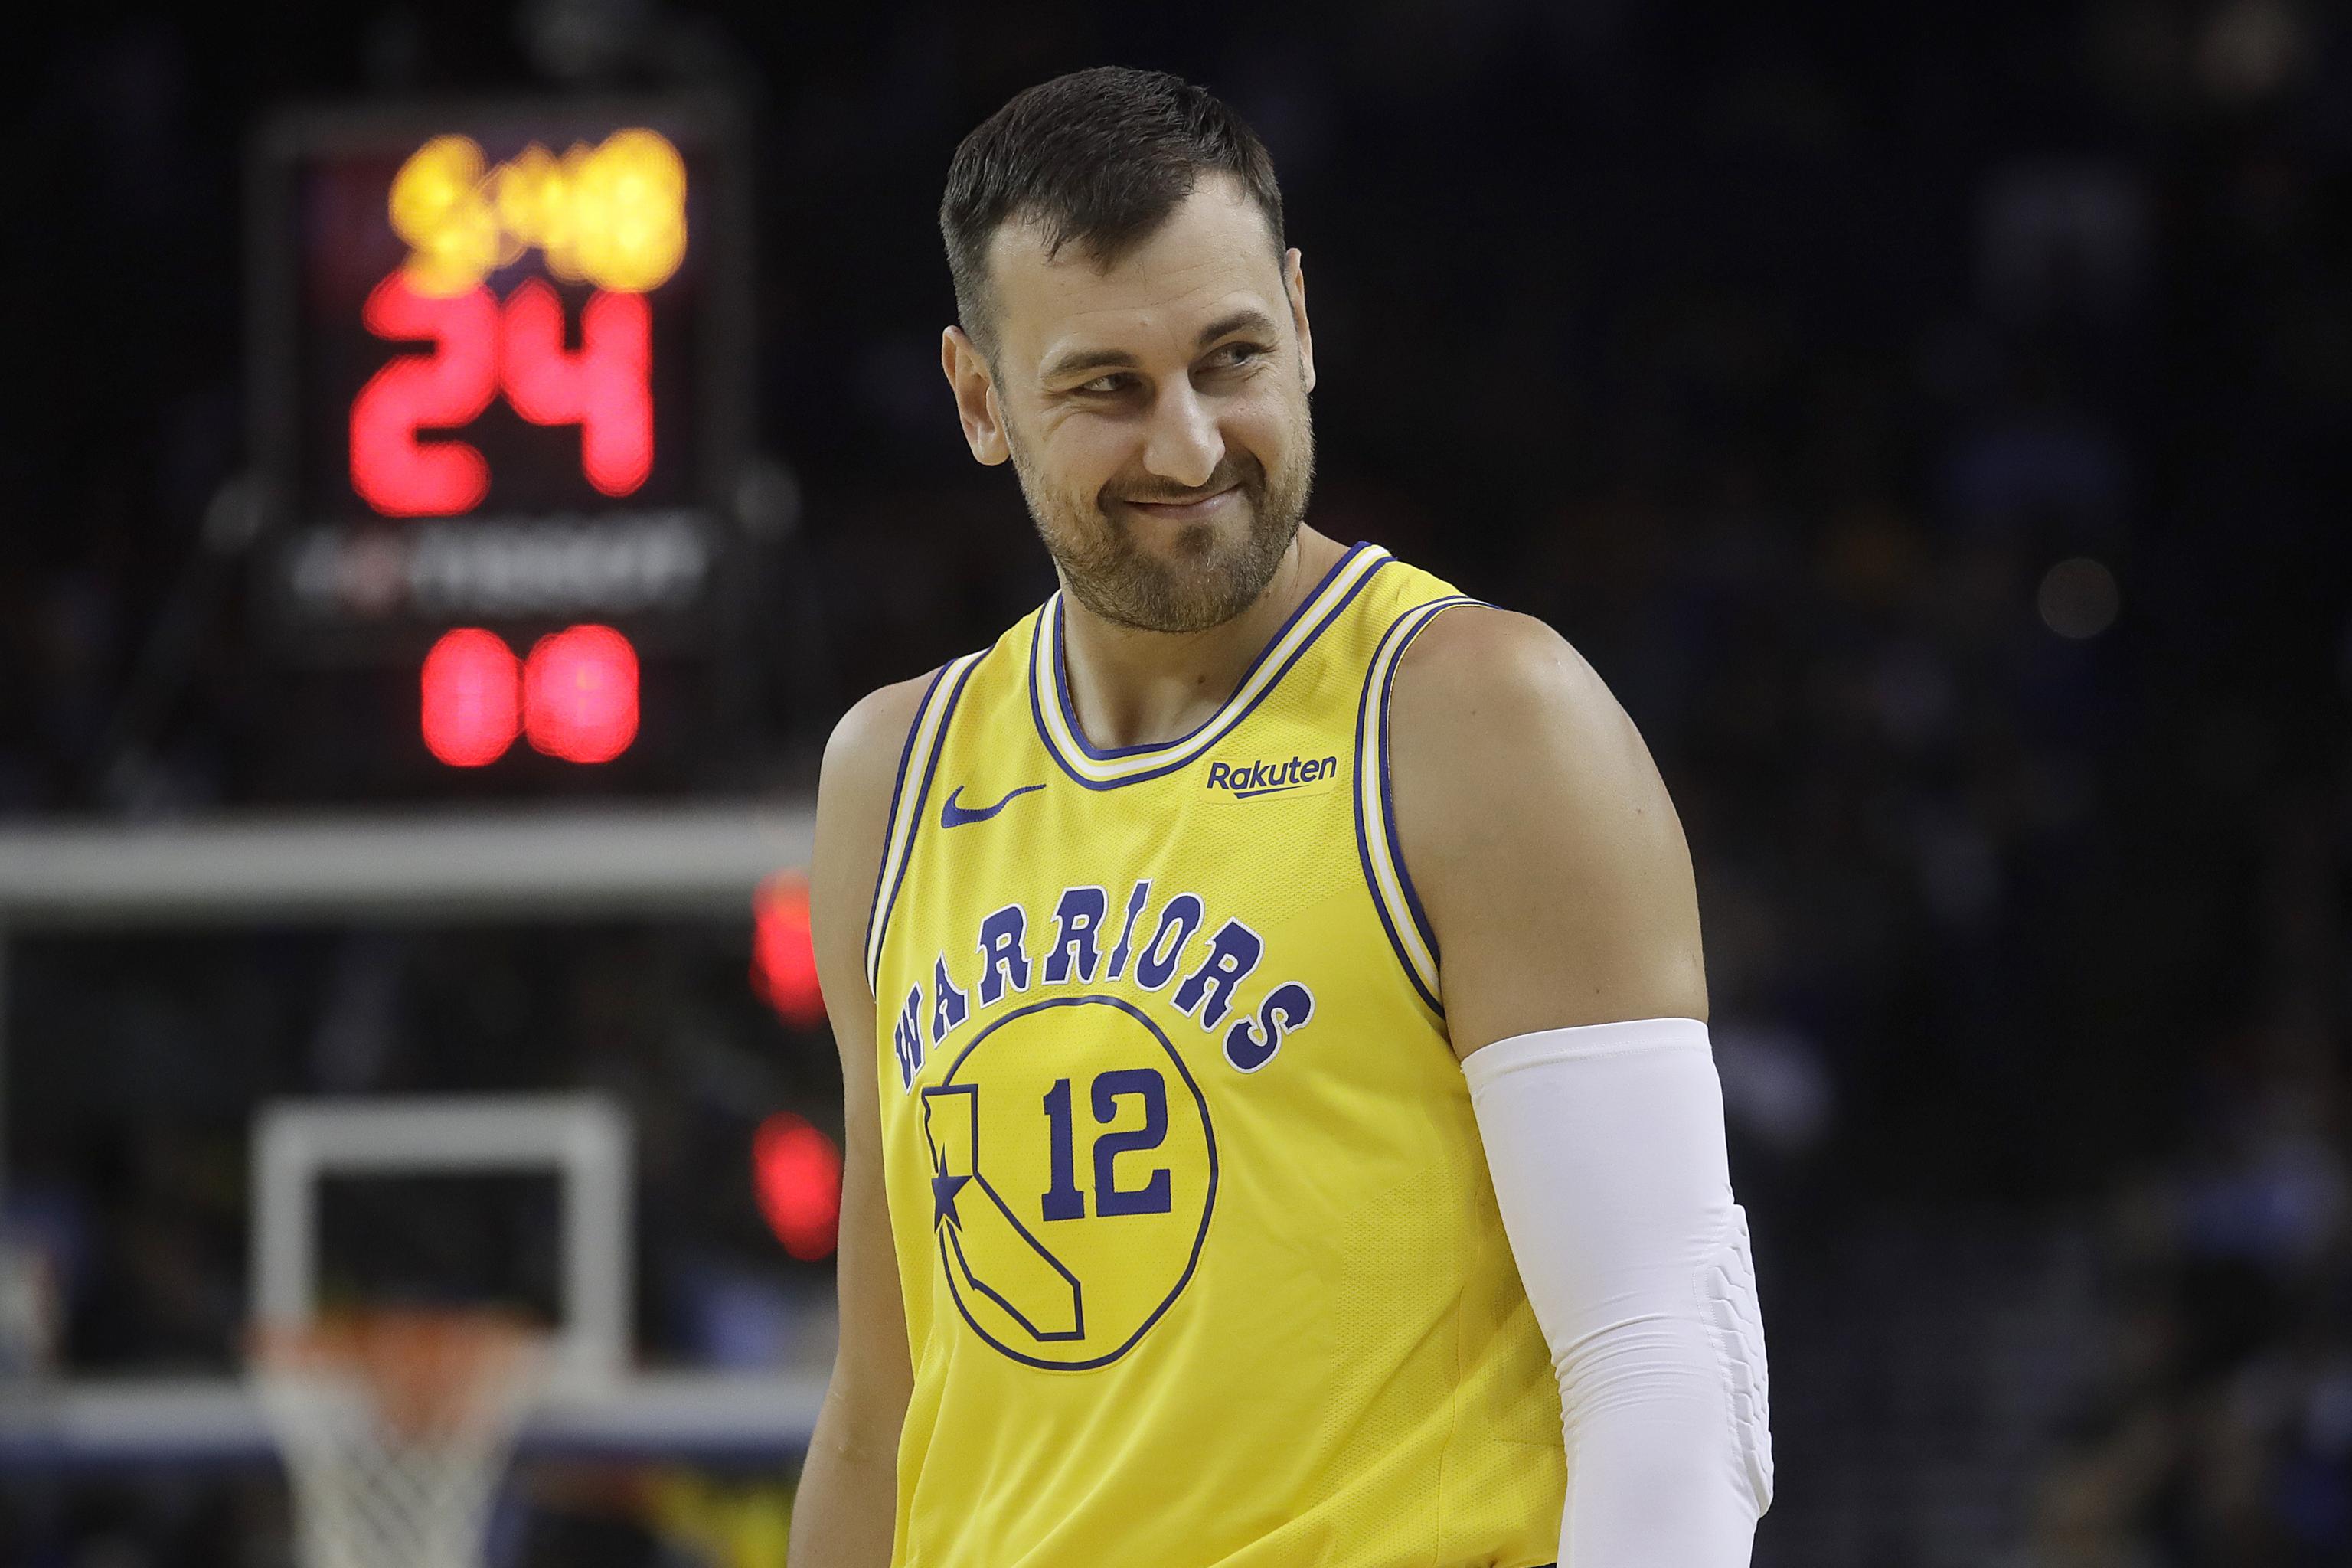 Center of attention: Cavaliers sign center Andrew Bogut